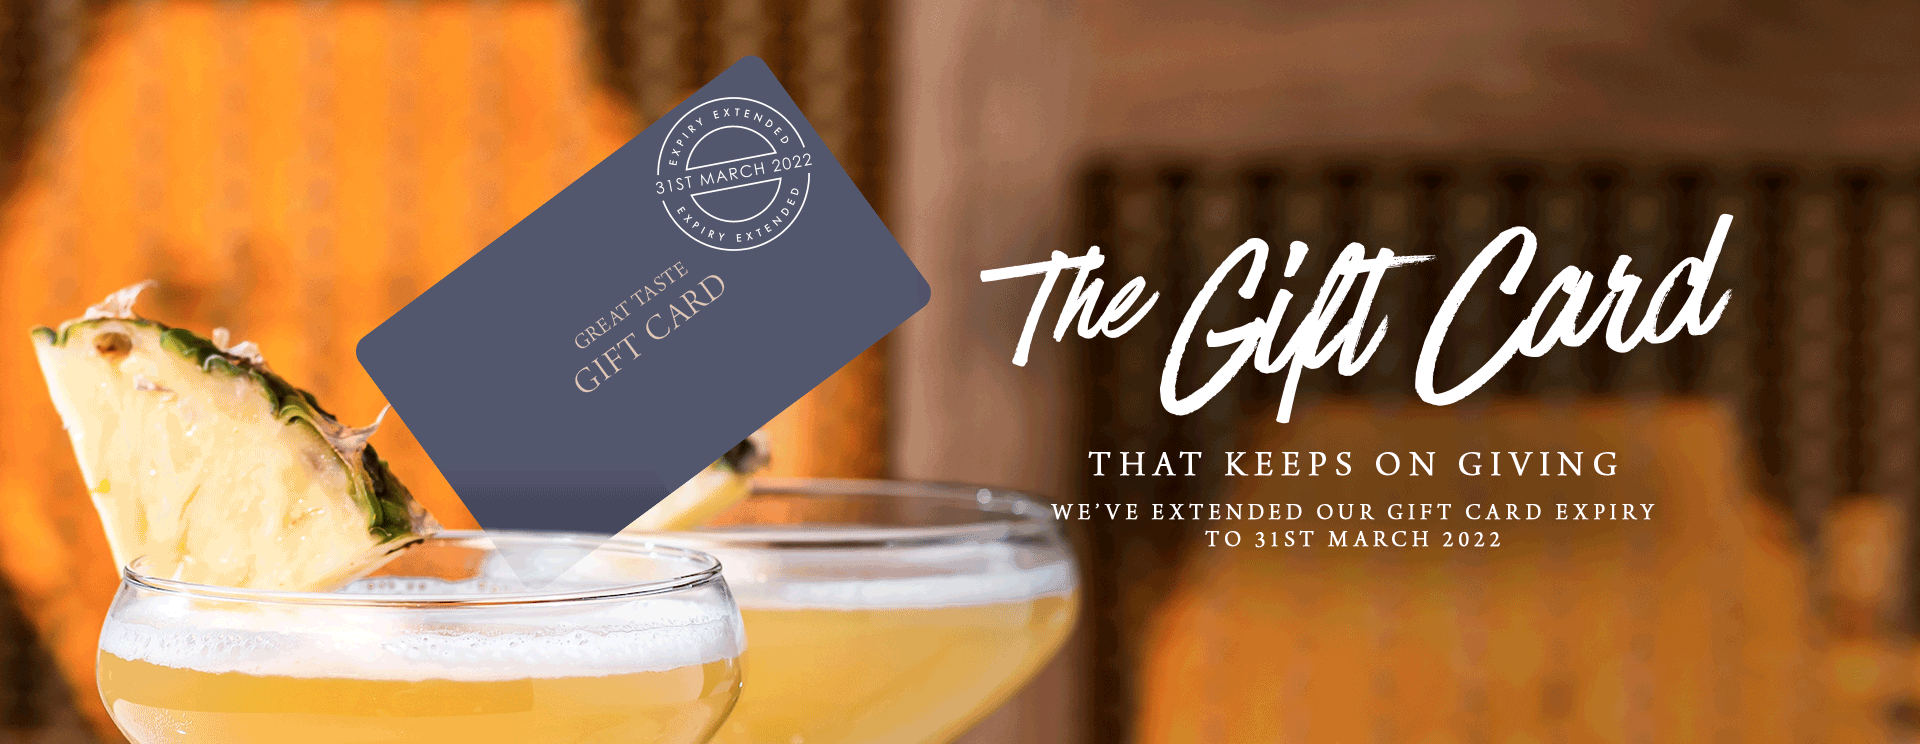 Give the gift of a gift card at The Bell